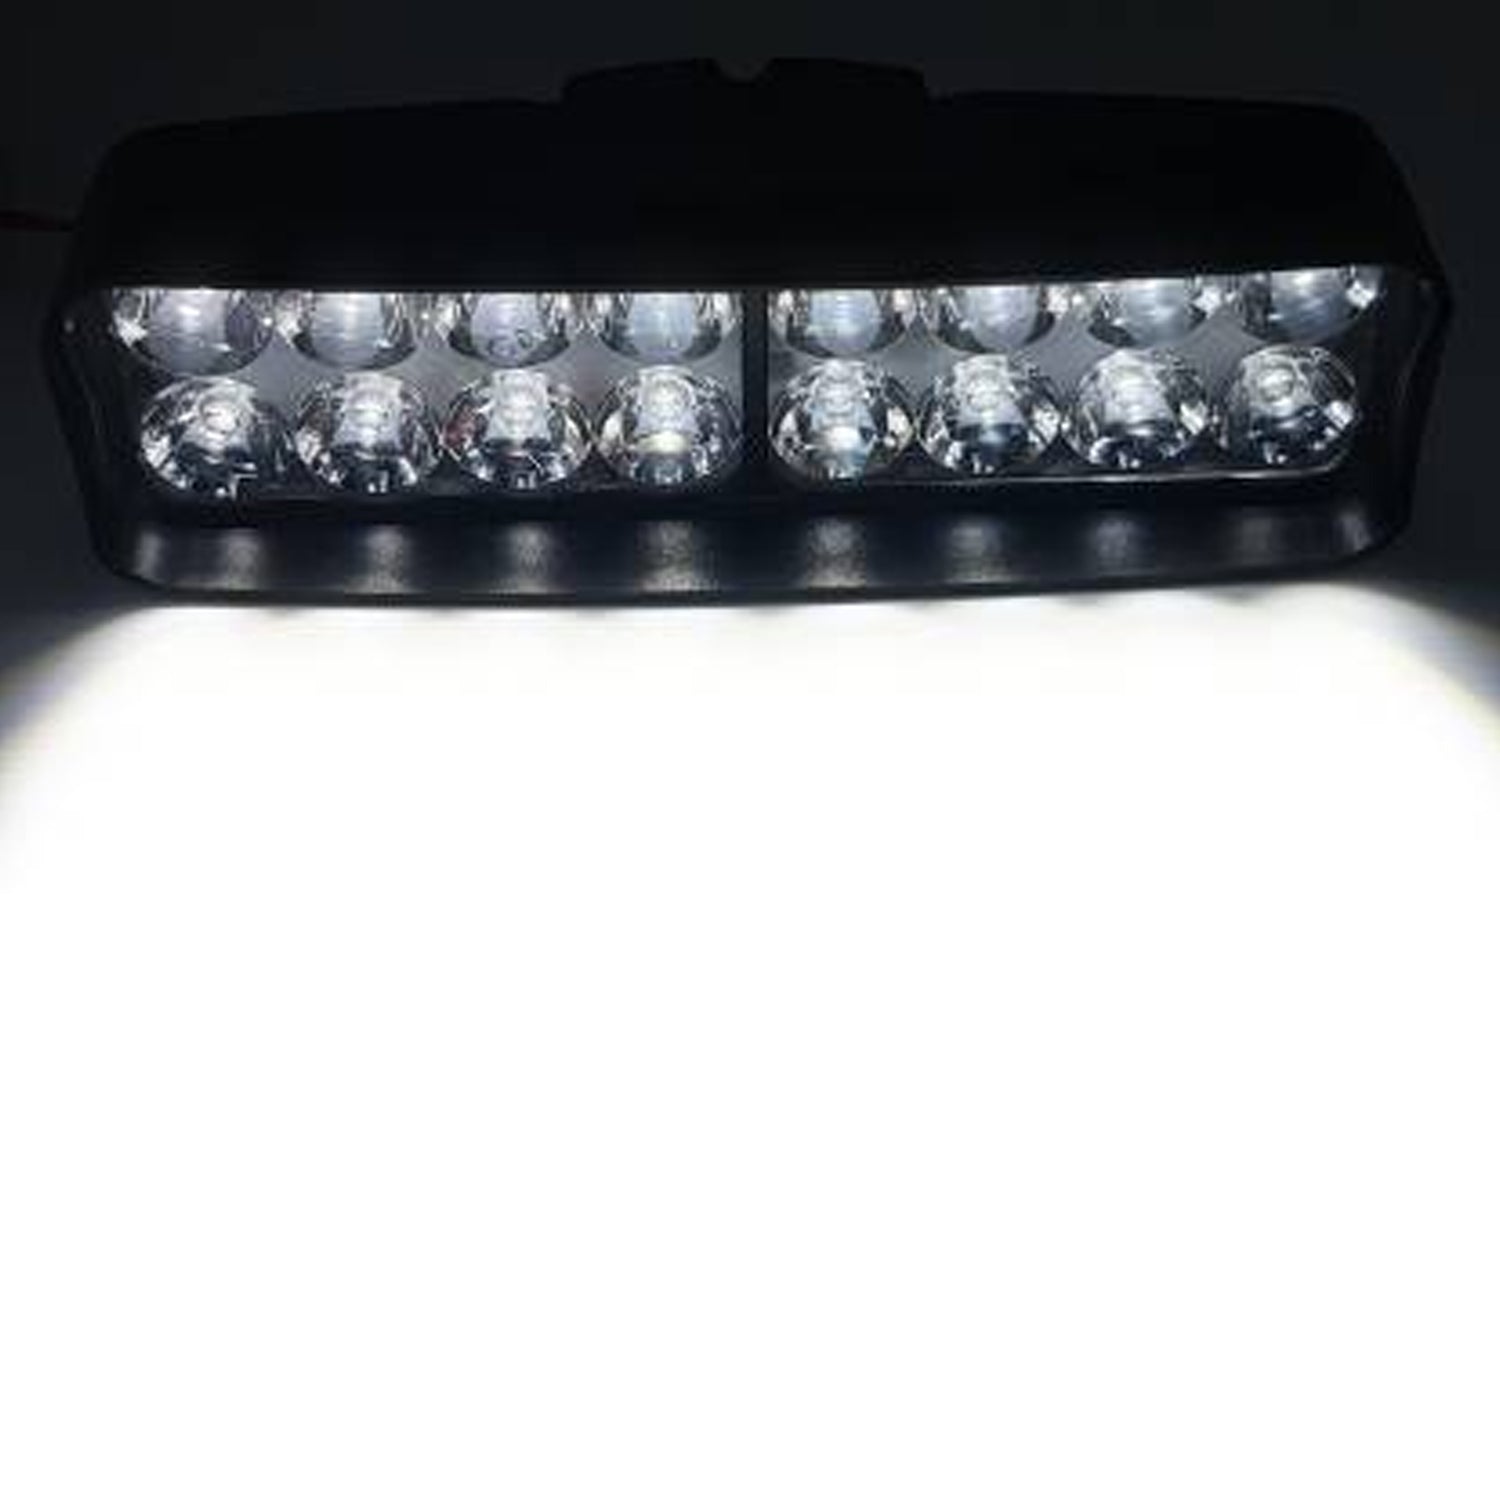 16 LED Fog Lights for Bikes and Cars High Power, Heavy clamp and Strong ABS Plastic. (16 led Pair with Switch) - bikerstore.in